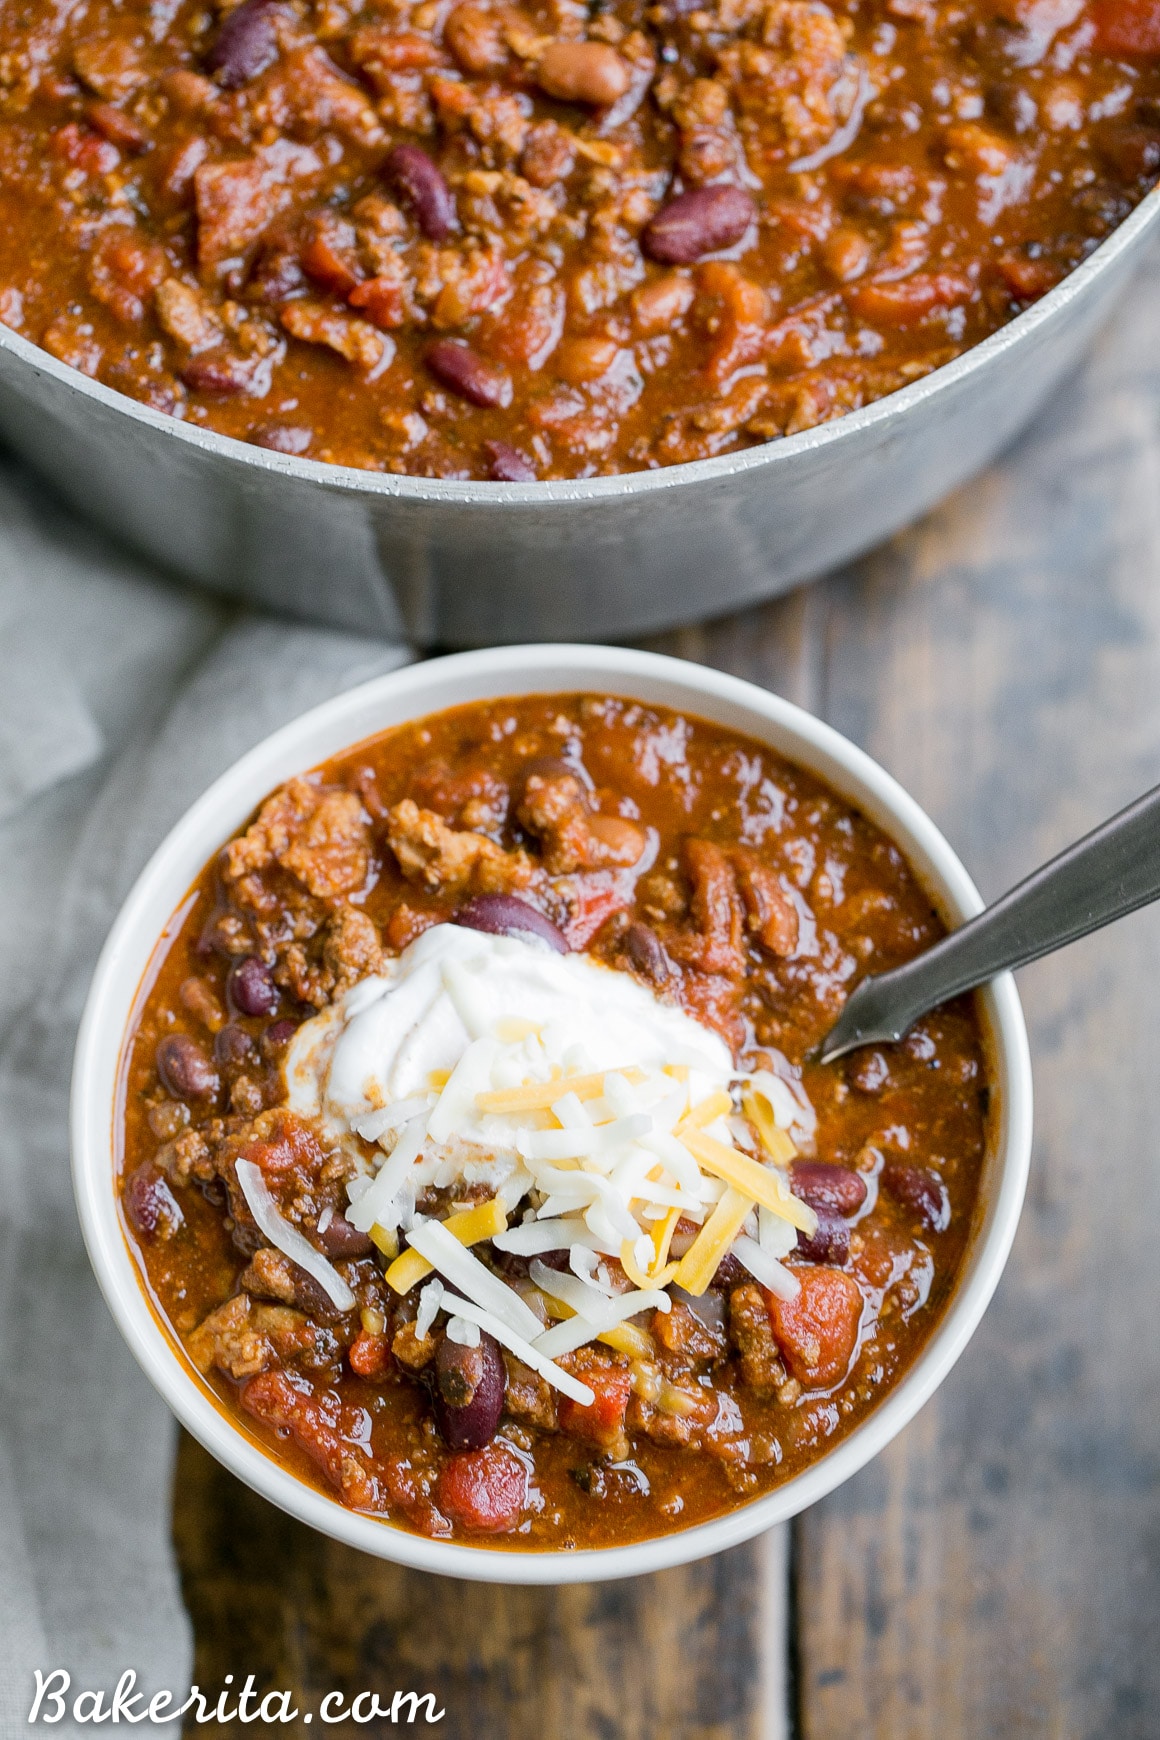 This recipe for My Best Chili is a major favorite around here! It's a hearty, warming chili made with ground beef, bacon, sausage, and just the right amount of kick.